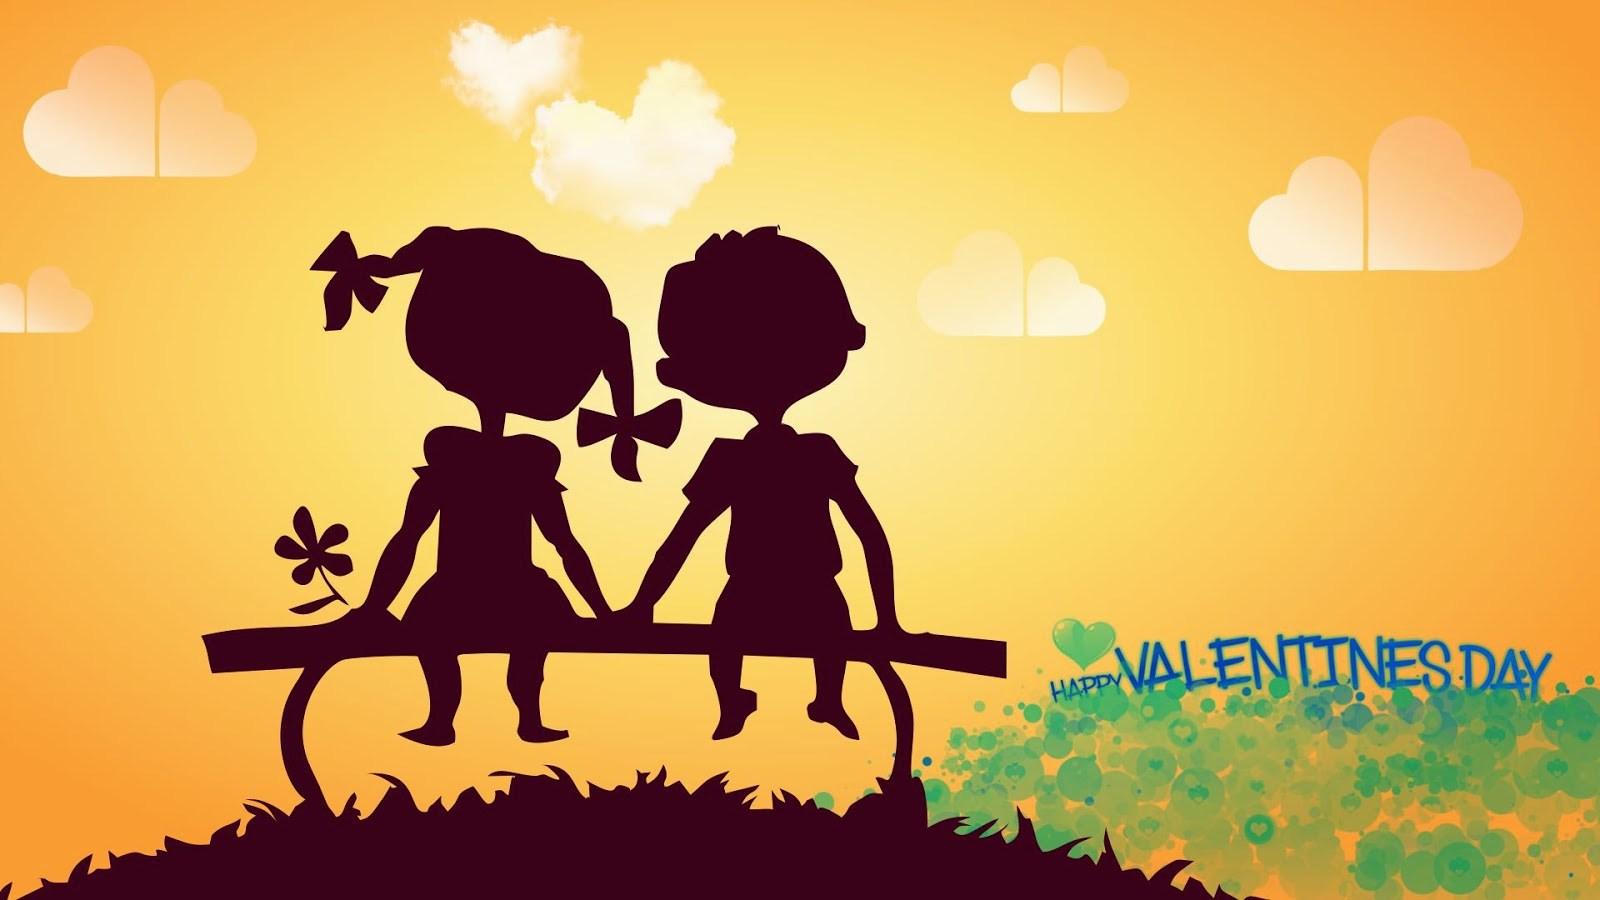 Hpy Valentine's Day HD Wallpaper/ Image Lovely HD Pics for lovers